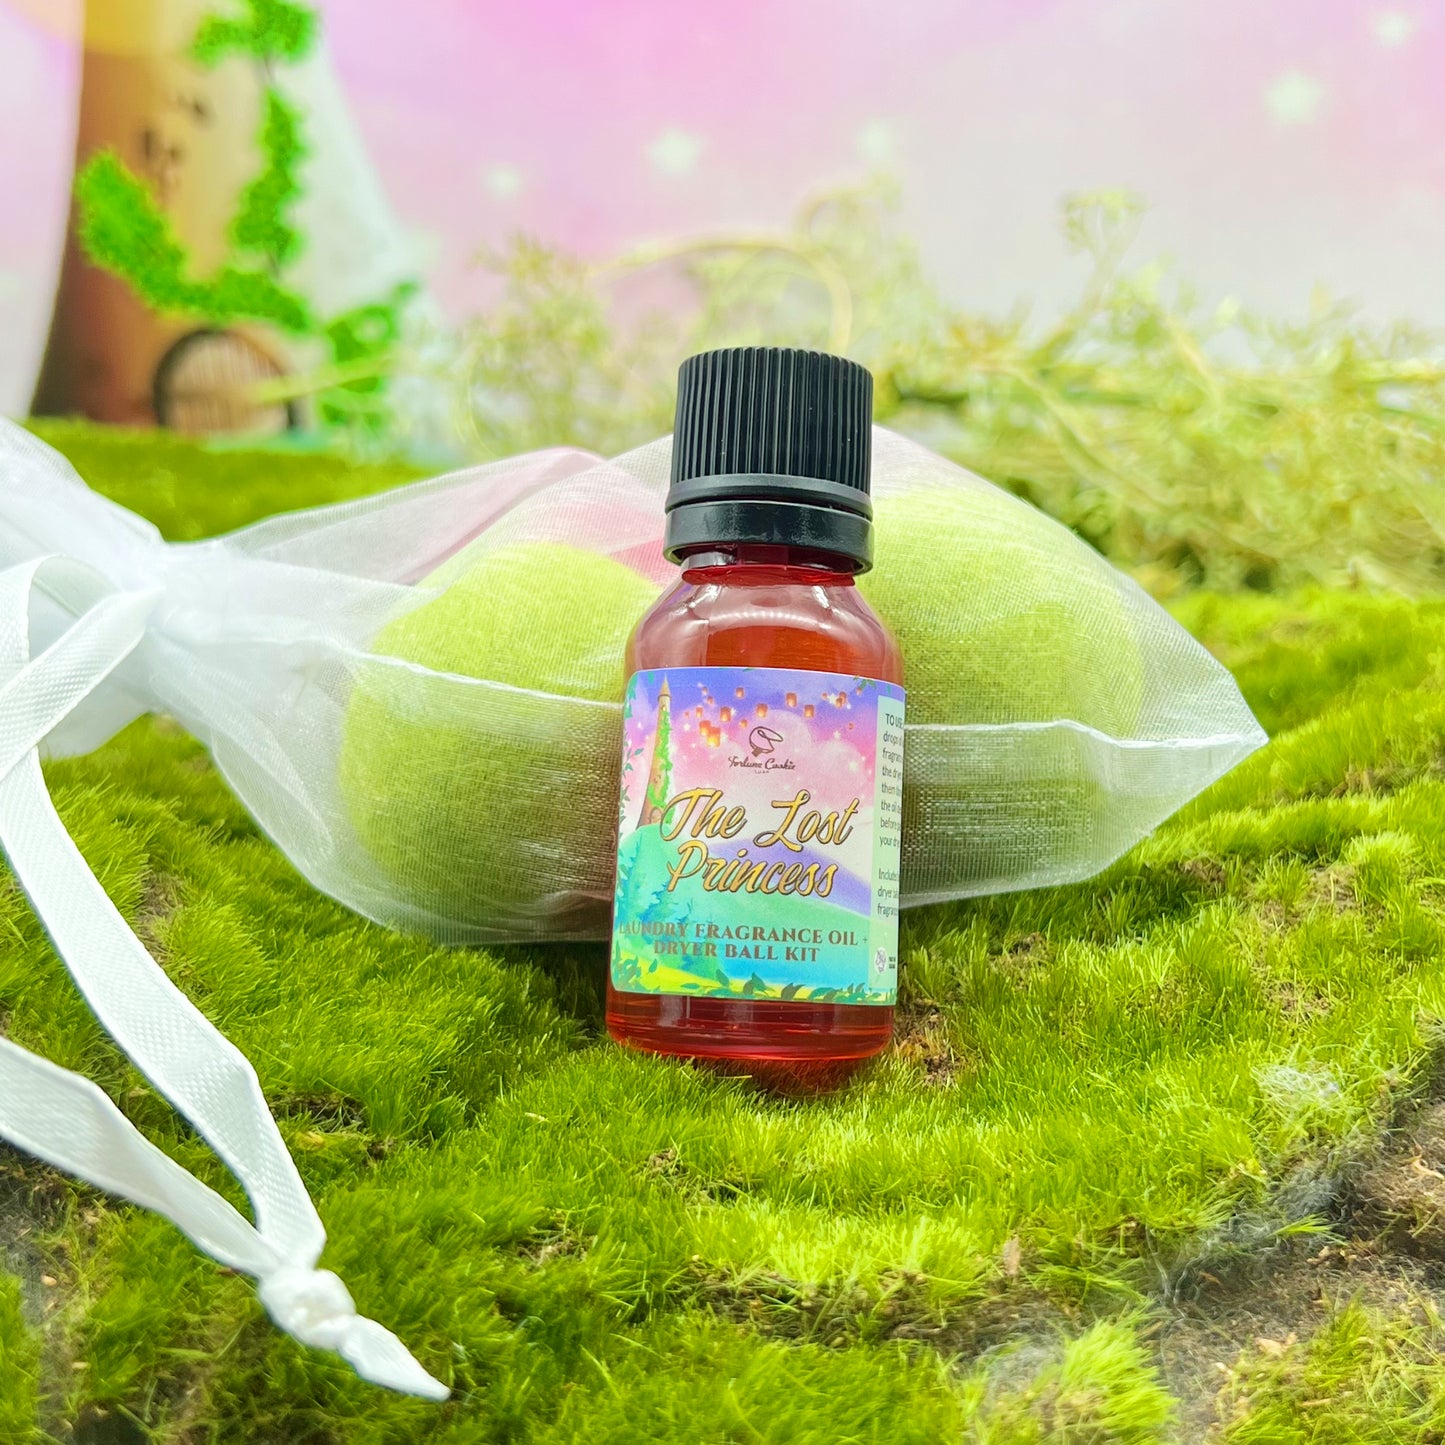 THE LOST PRINCESS Laundry Fragrance Oil Kit